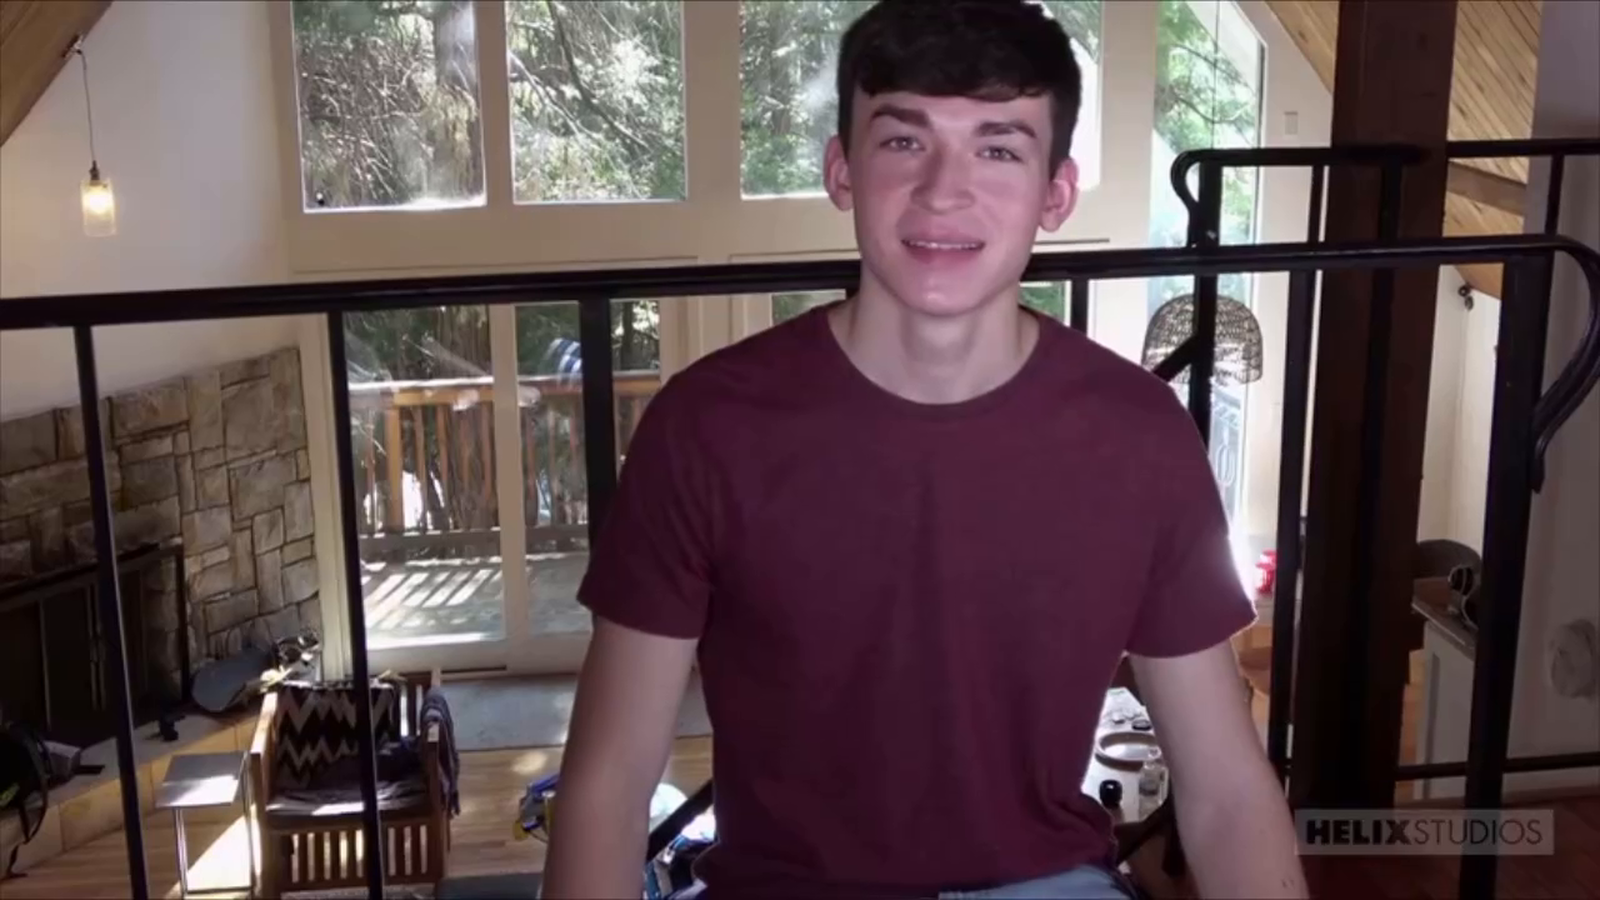 Video by GayPorn with the username @GayPorn,  July 6, 2020 at 3:34 PM and the text says 'Devin Holt: https://refer.helixstudios.net/track/MTAxMTYxLjMuOS45LjYuMC4wLjAuMA/video/7233/devin-holt-solo-session.html'